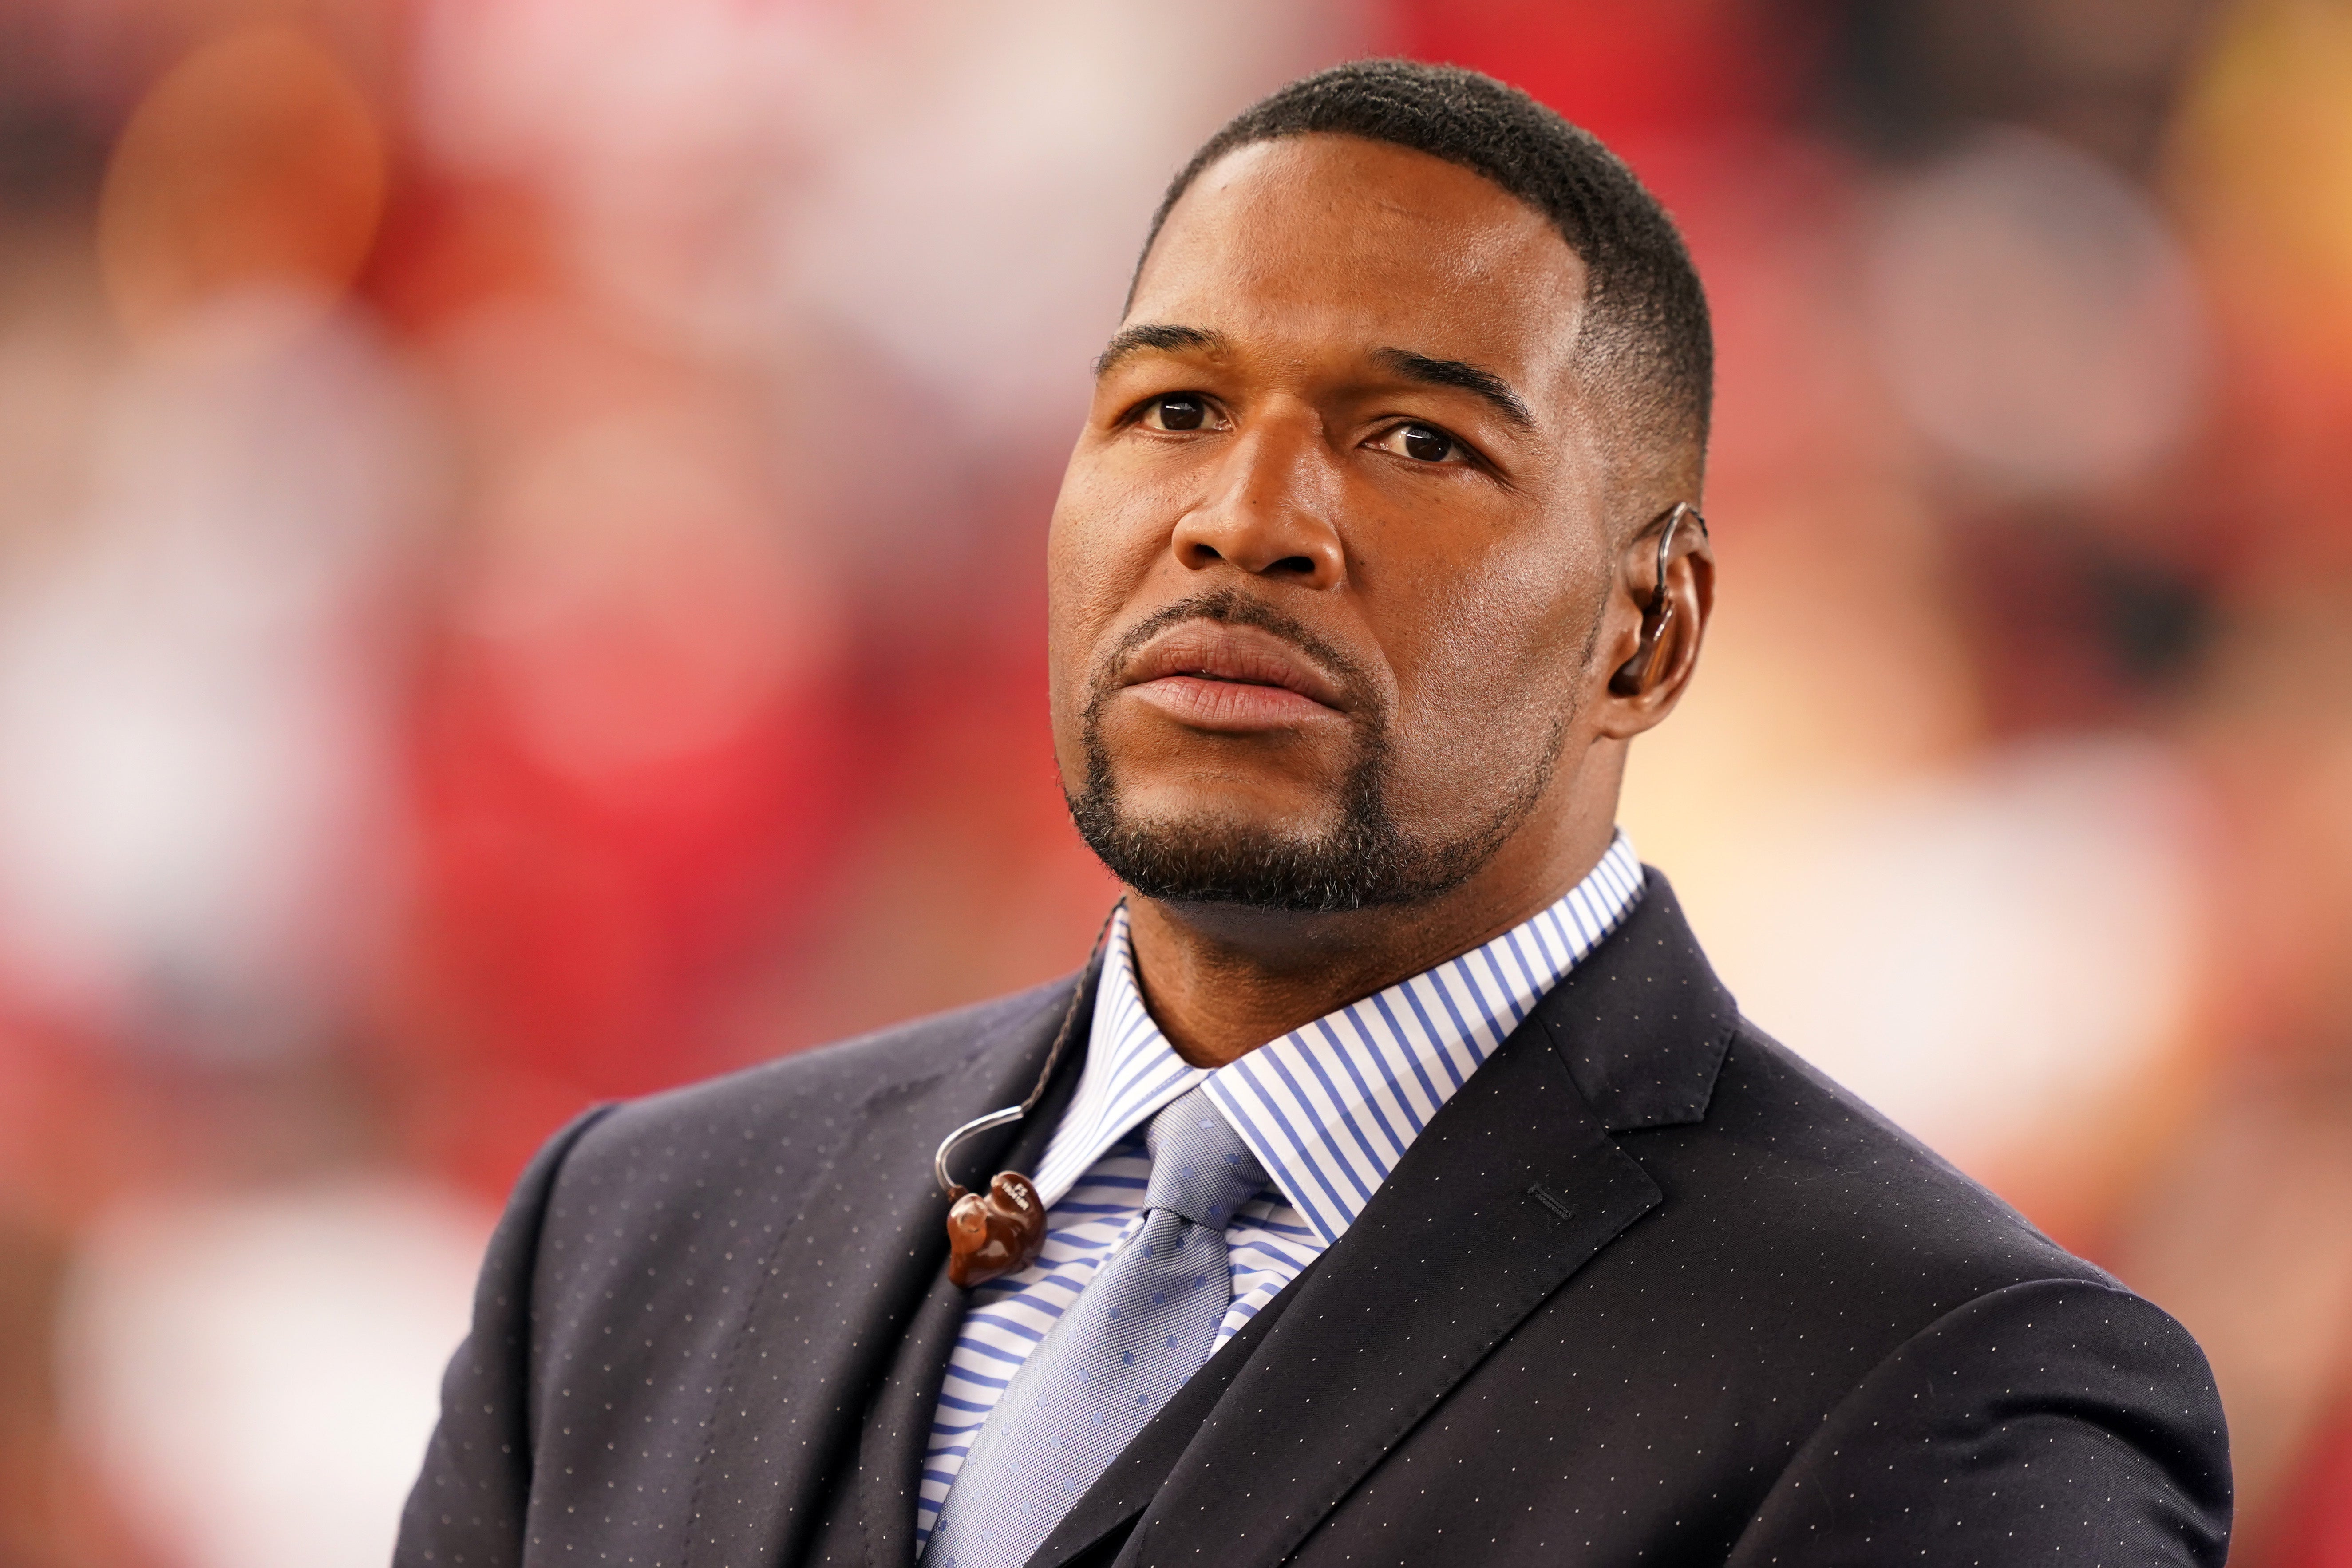 TV personality Michael Strahan looks on prior to the NFC Championship game between the San Francisco 49ers and the Green Bay Packers at Levi's Stadium on January 19, 2020 in Santa Clara, California.